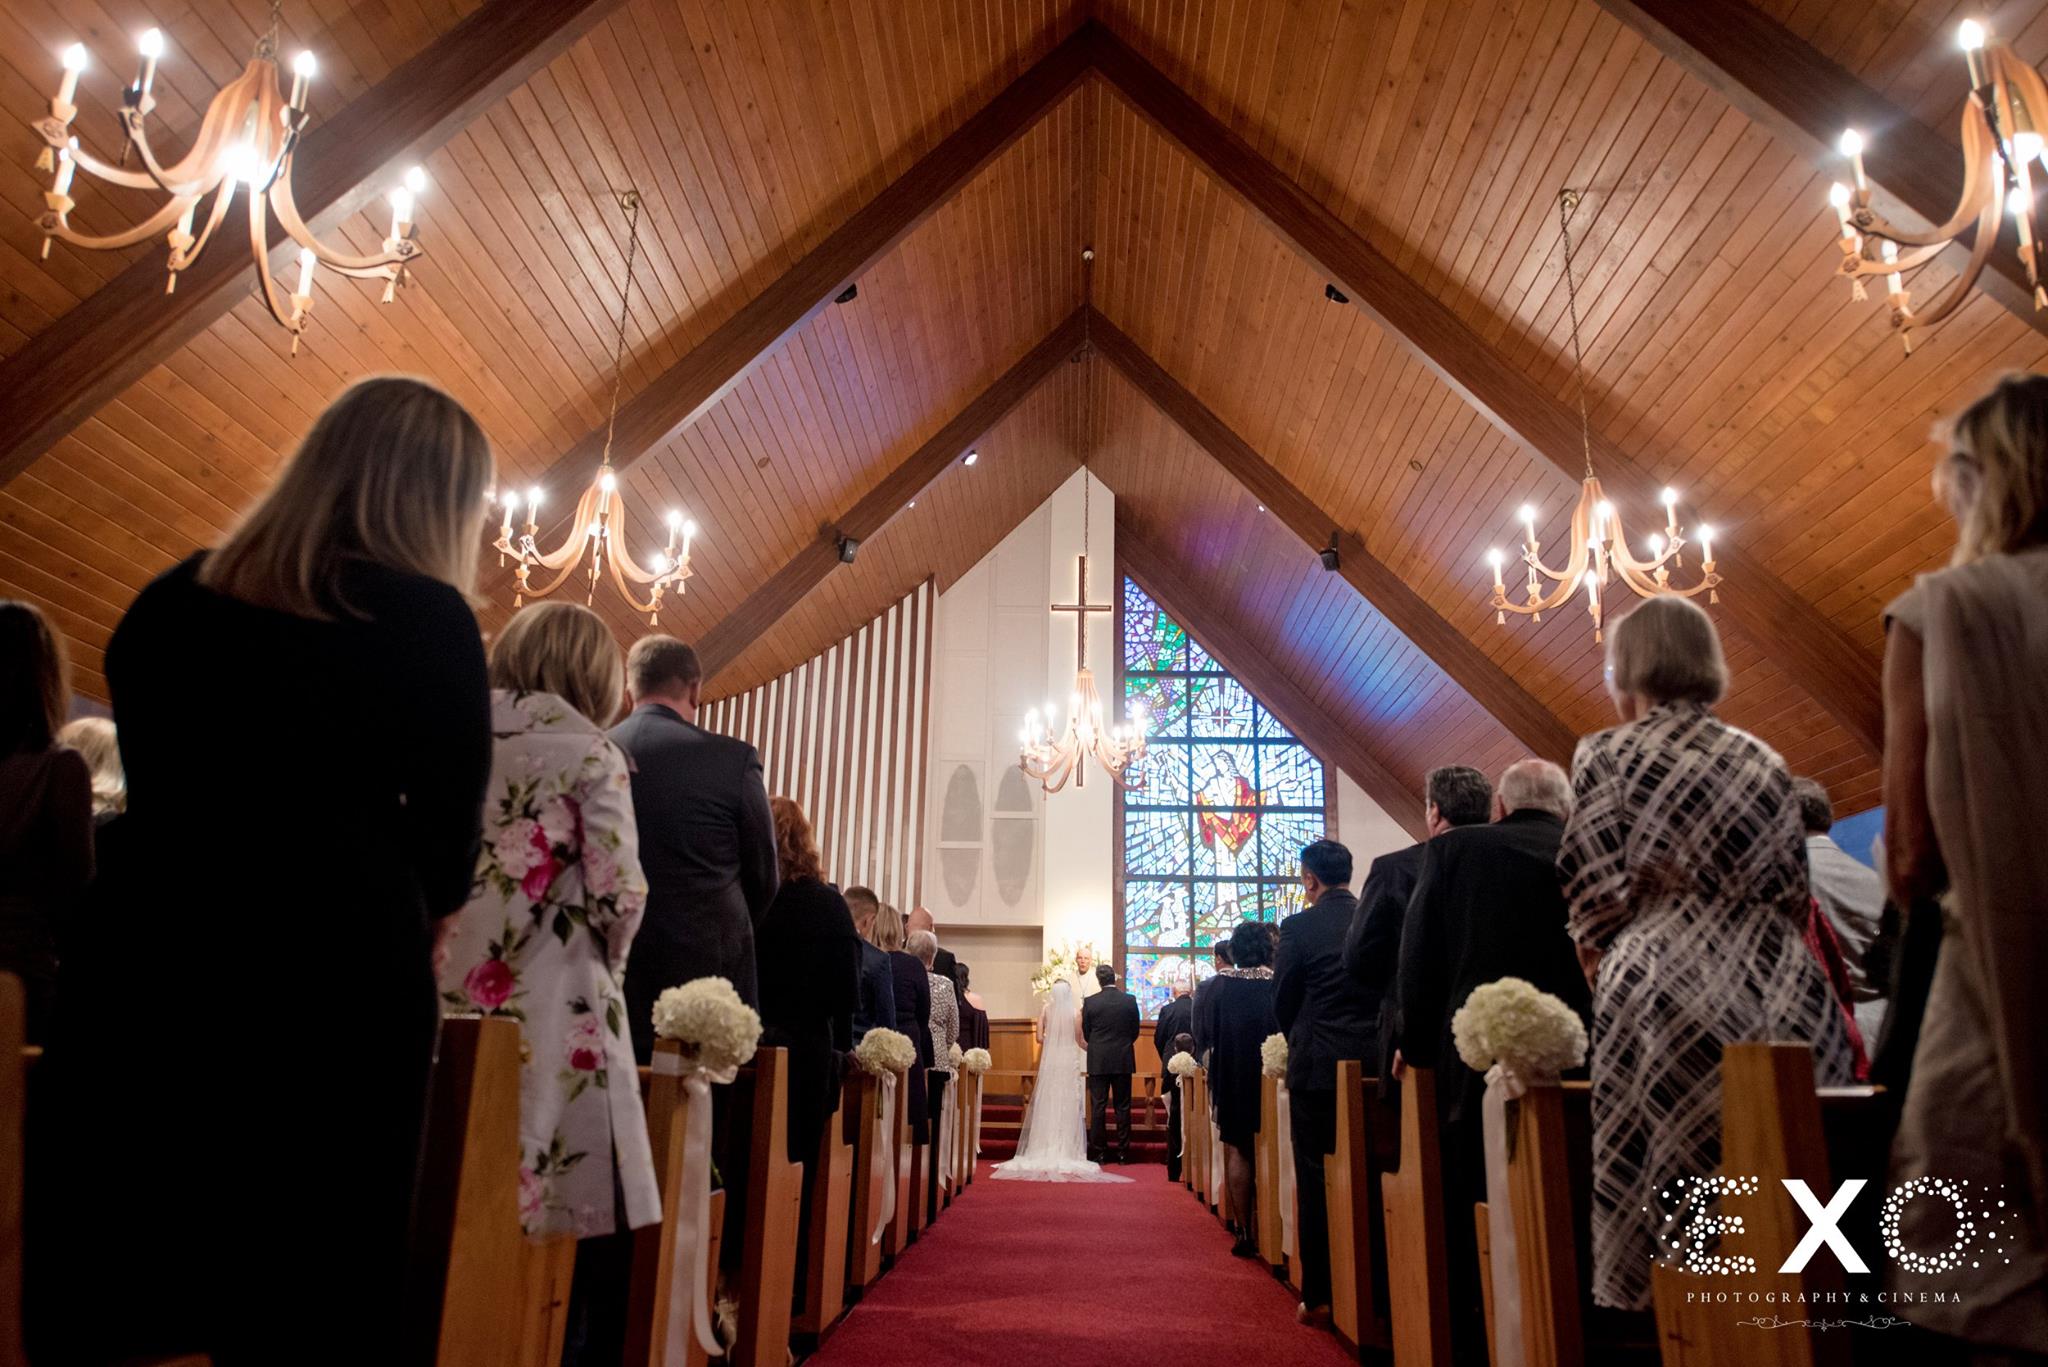 low perspective shot of bride and groom at altar during ceremony